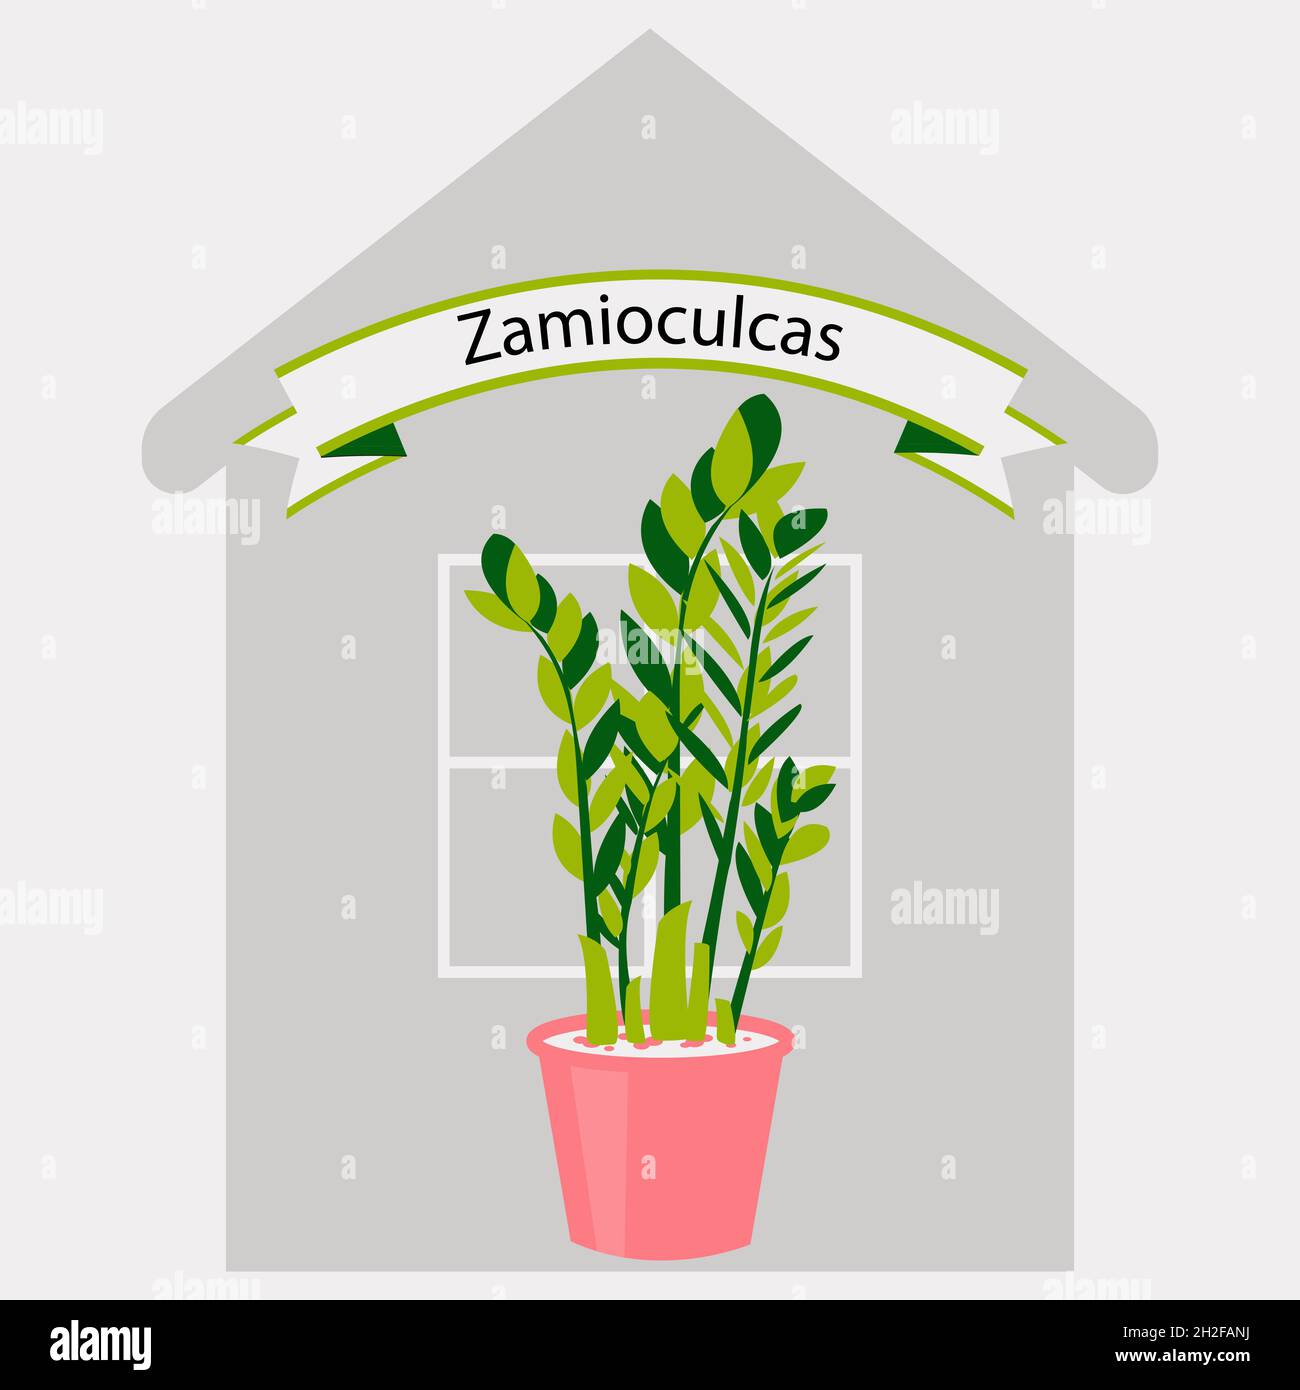 Cute Zamiokulkas Dollar Tree in a vase. House flower in a pot for room decoration. Vector illustration of a green plant for a flat style office. Stock Vector